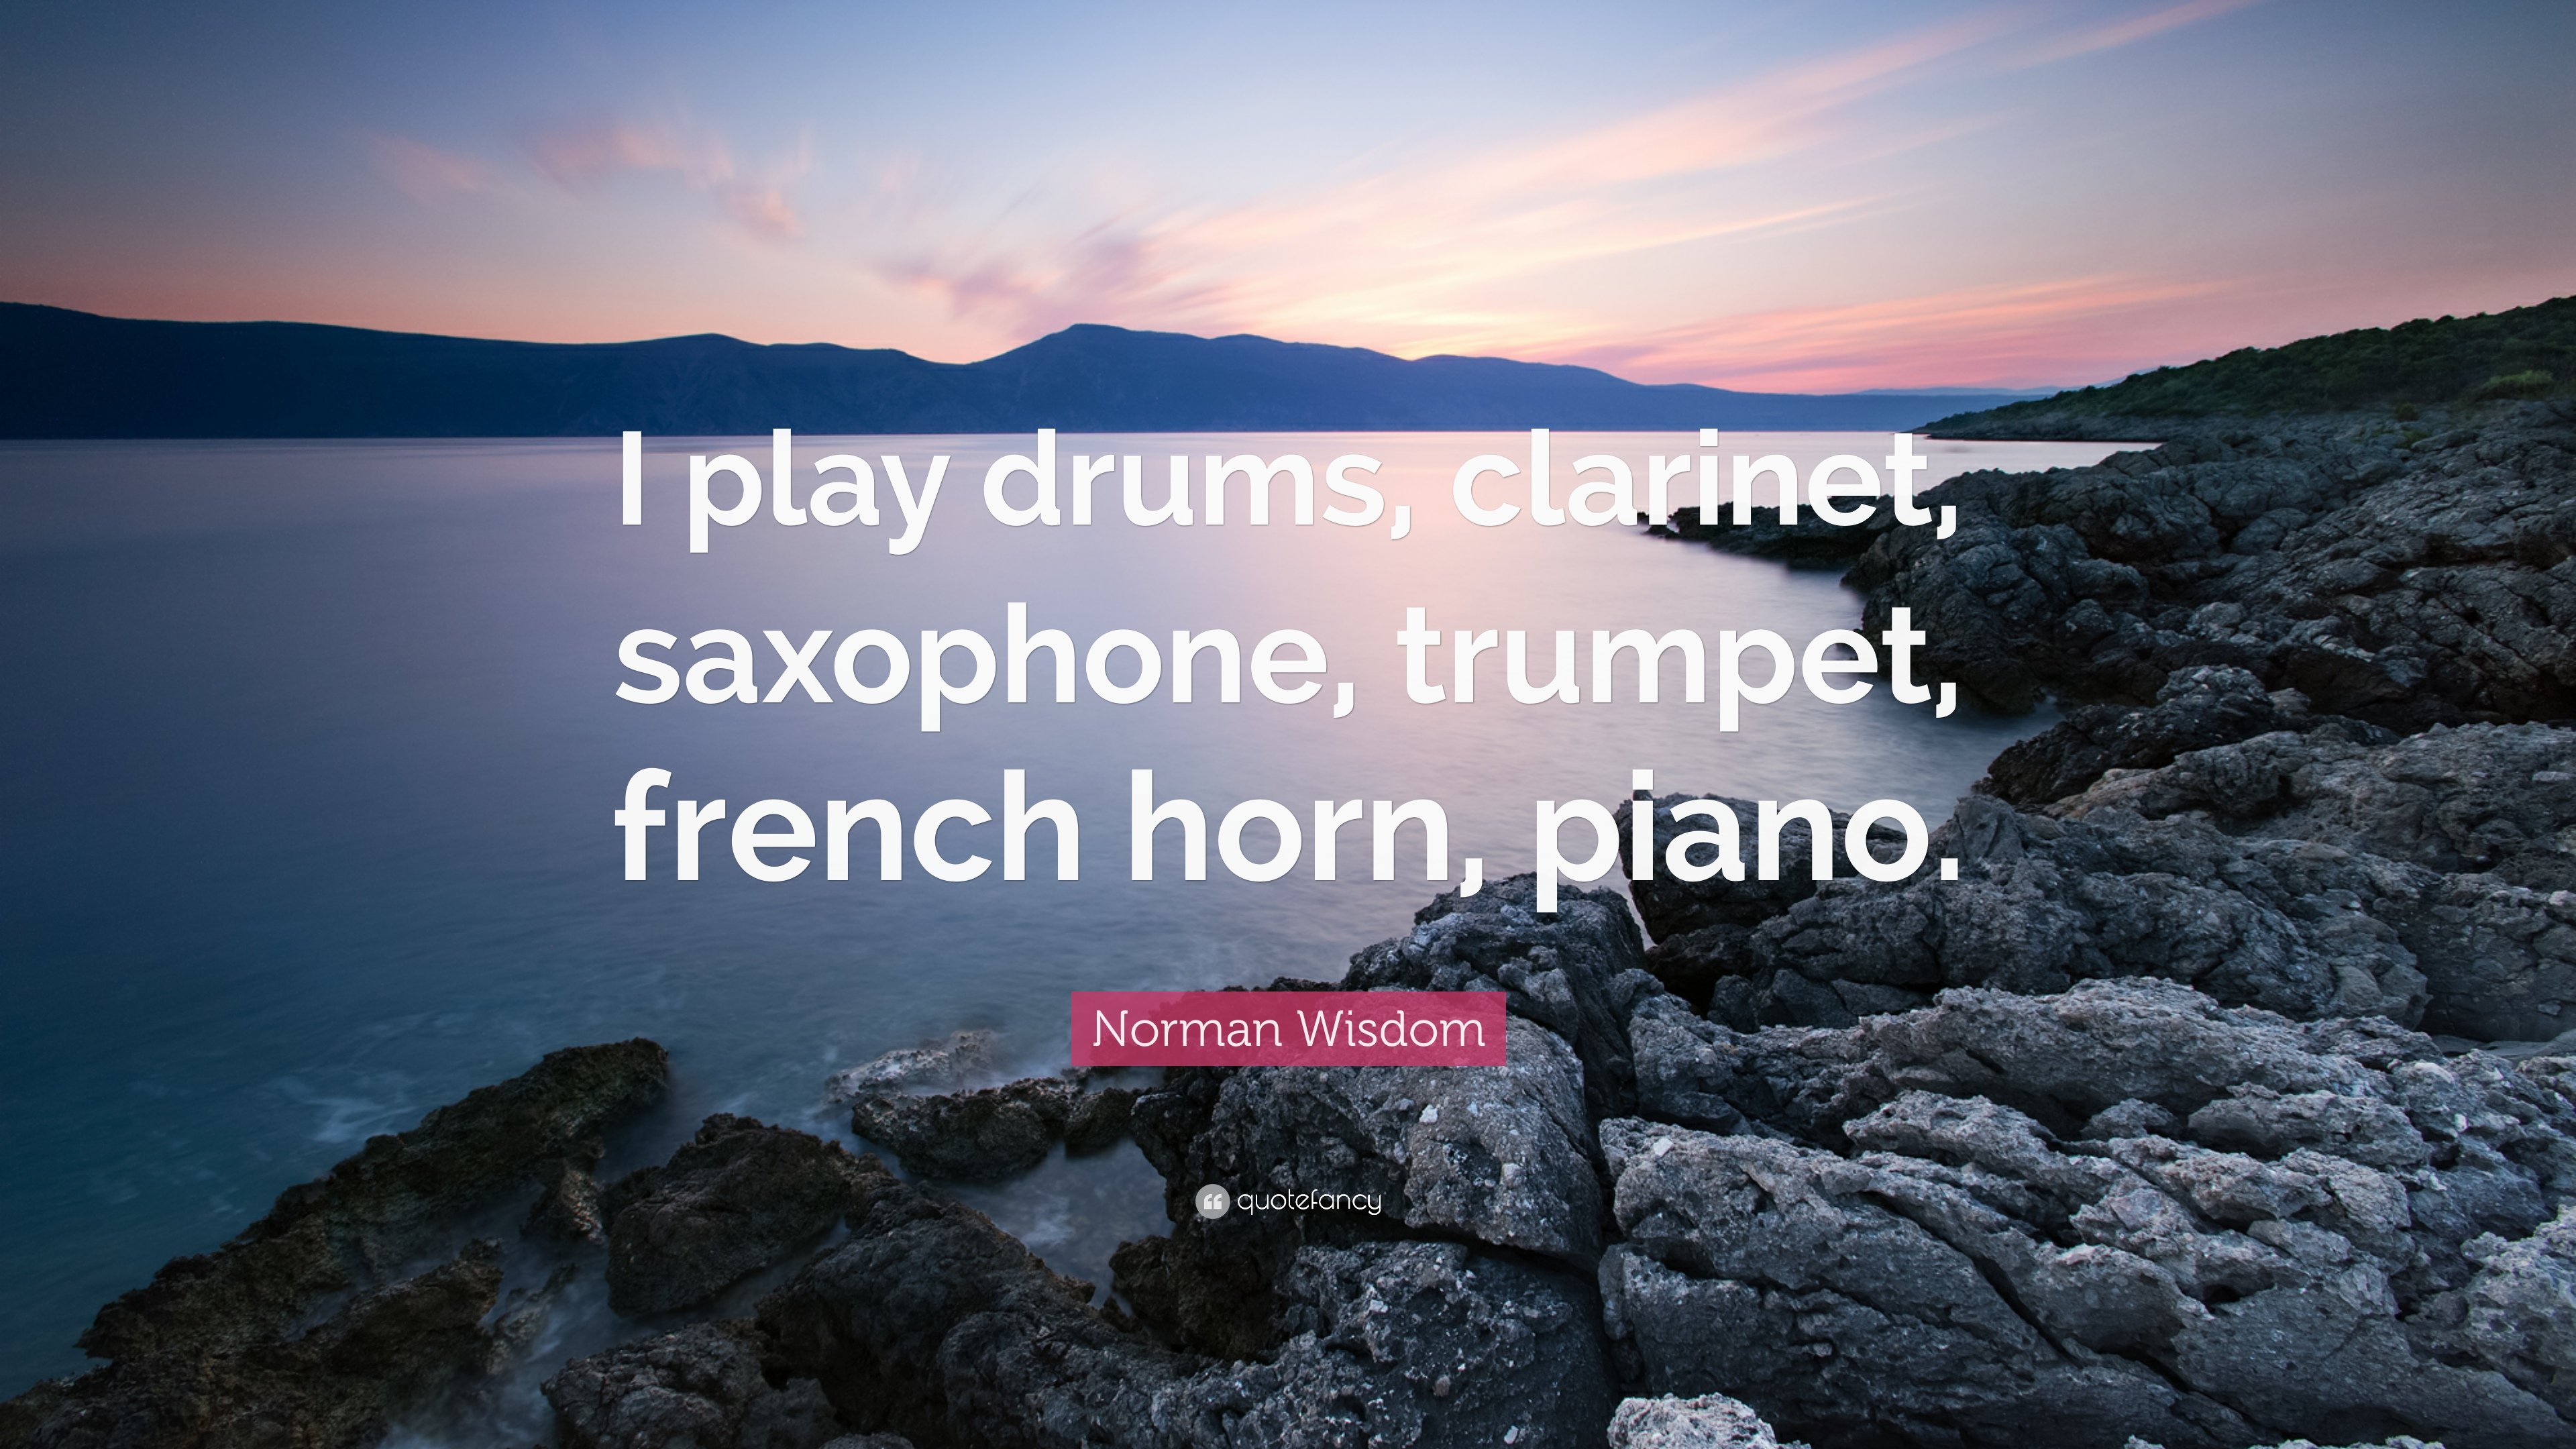 Norman Wisdom Quote: “I play drums, clarinet, saxophone, trumpet